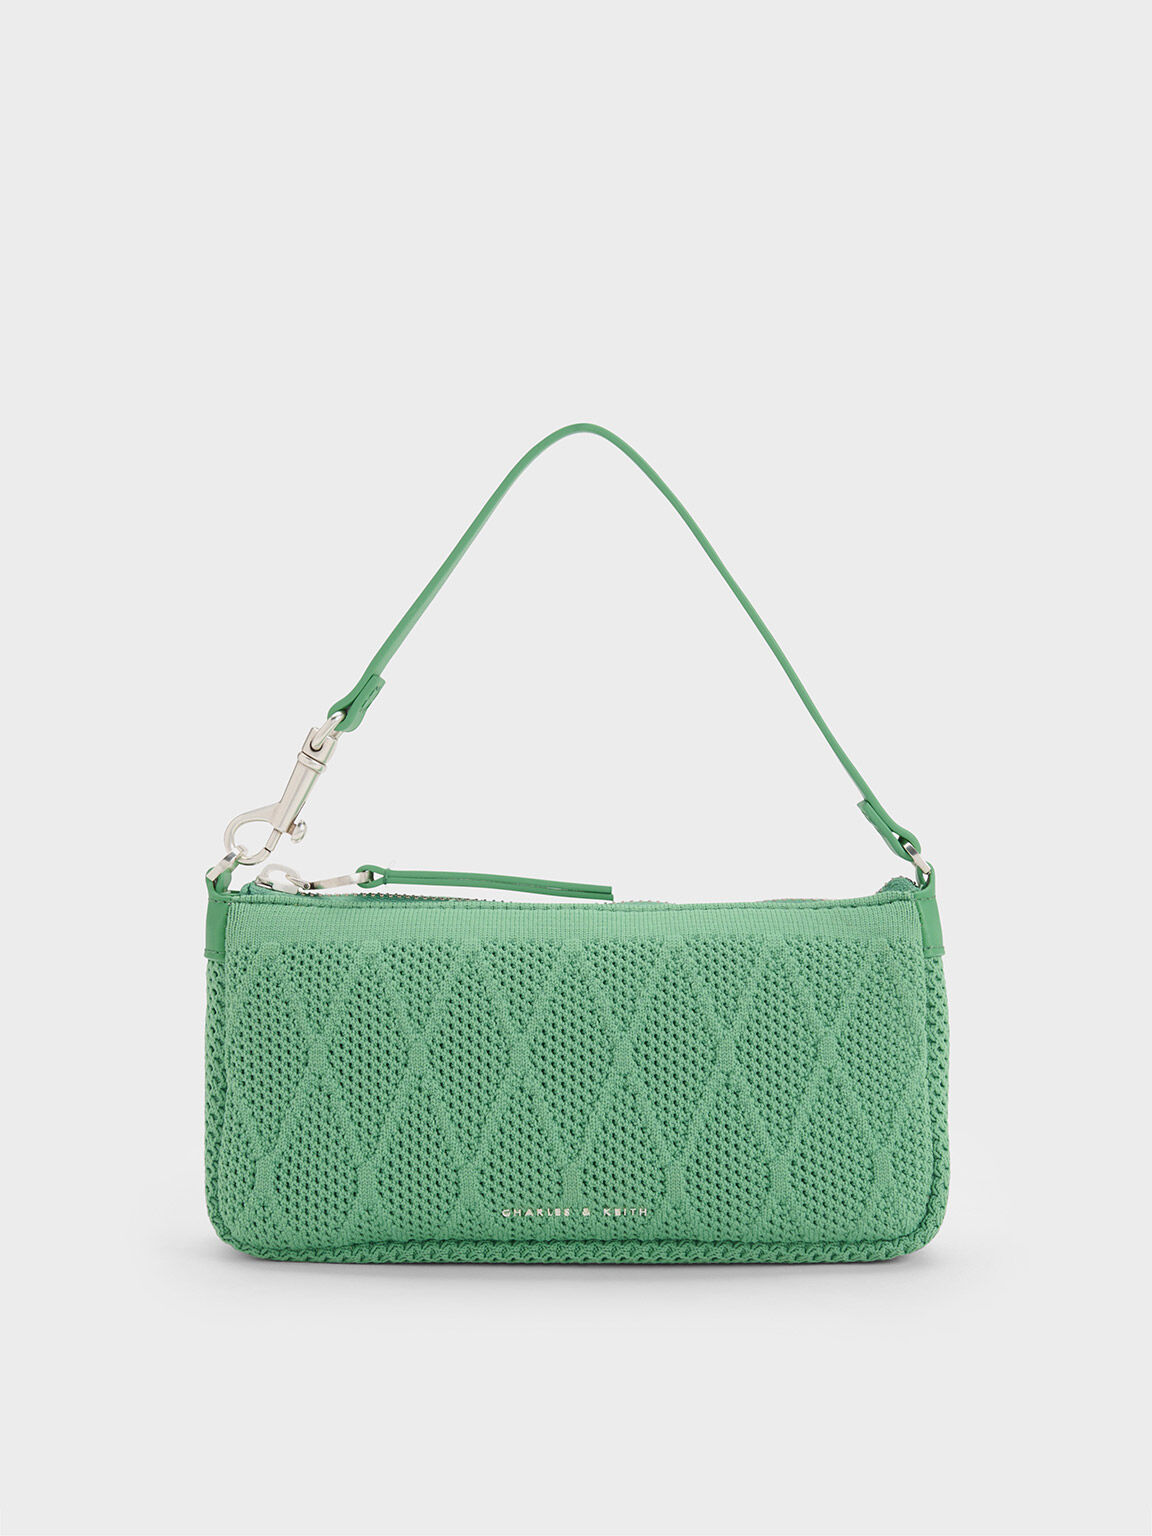 Geona Knitted Phone Pouch, Green, hi-res